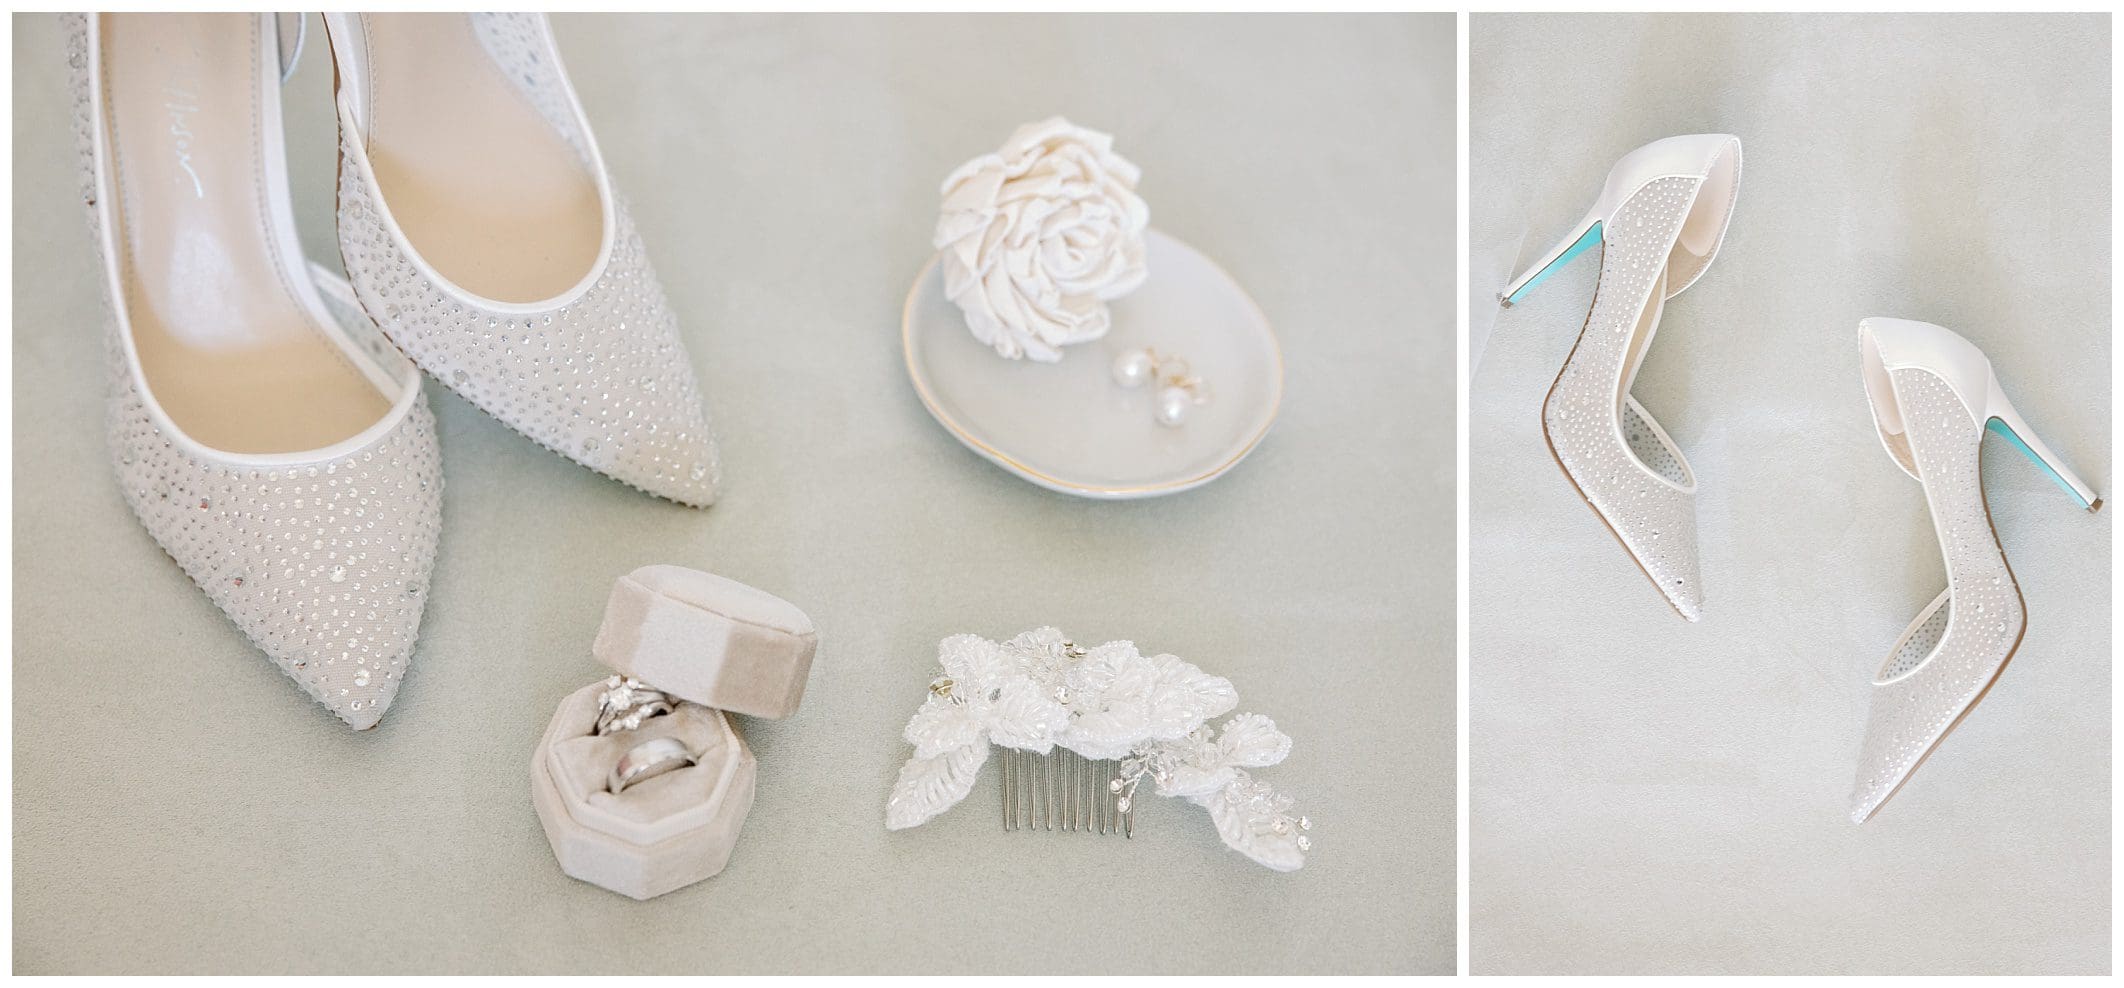 A white wedding dress and shoes, perfect for a fall wedding at Crest Center. Complete the look with a stunning ring and ring box.